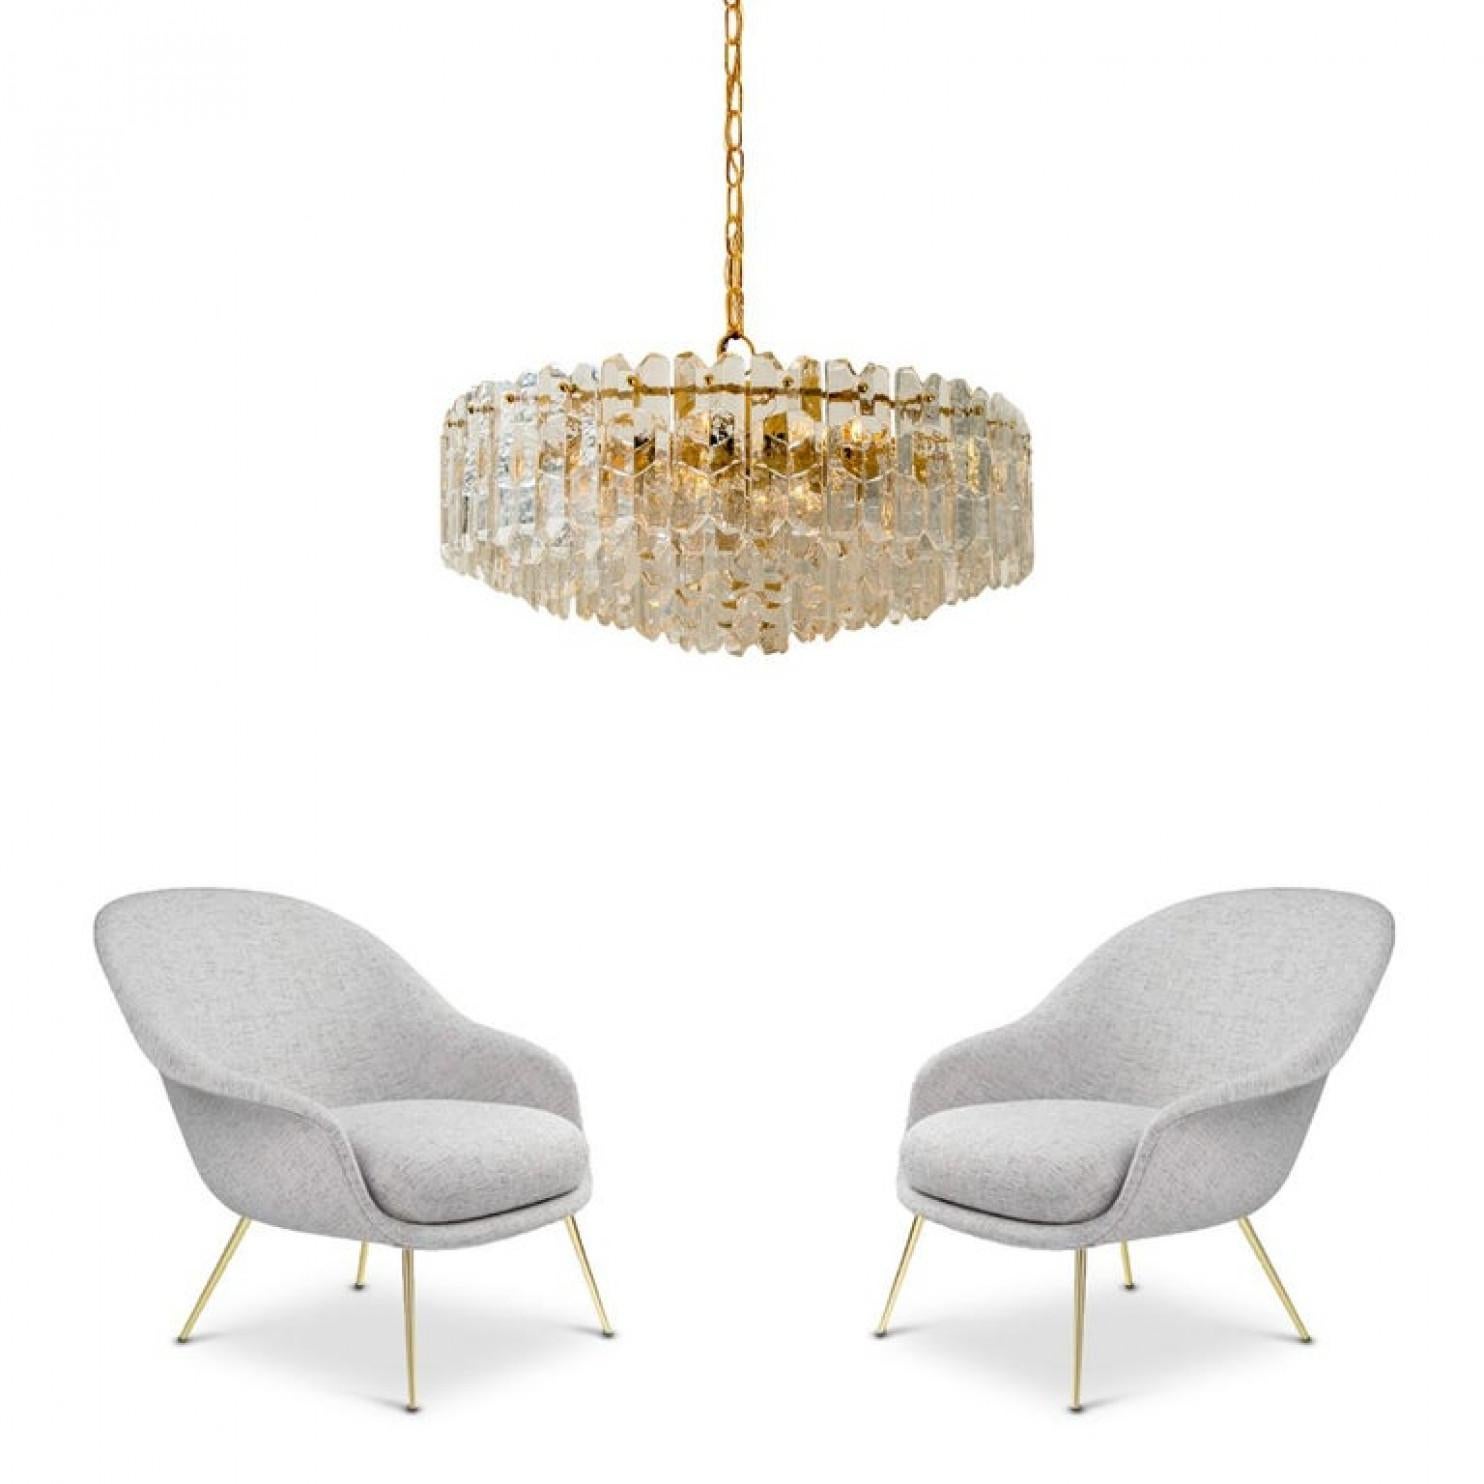 Mid-Century Modern 1 of the 2 Huge Kalmar Chandeliers 'Palazzo', Gilded Brass Glass, Austria, 1970s For Sale